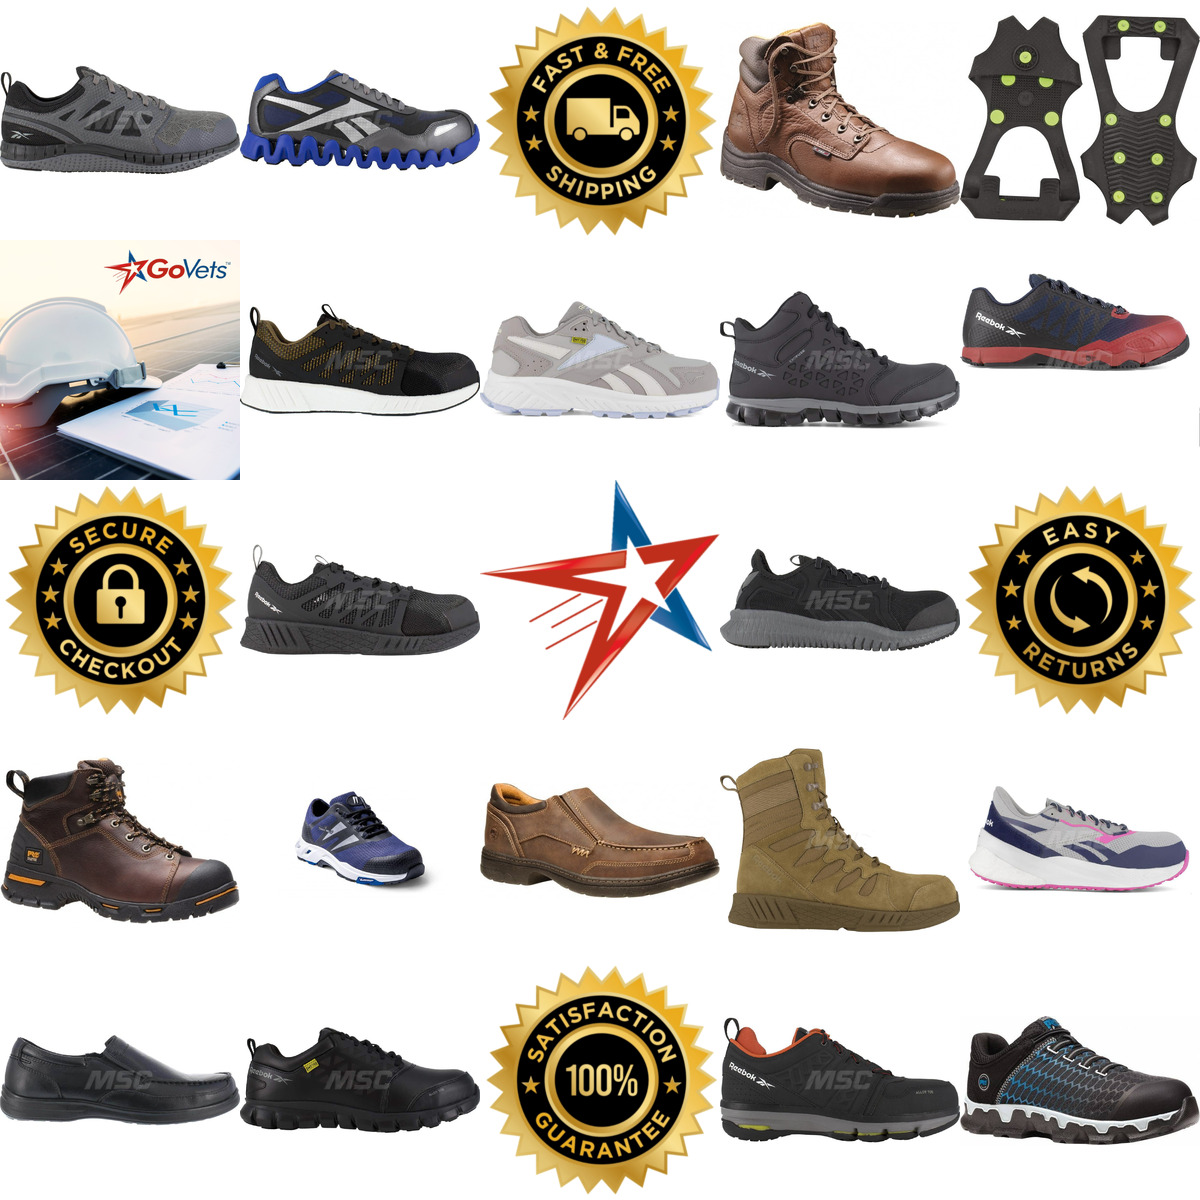 A selection of Protective Footwear products on GoVets